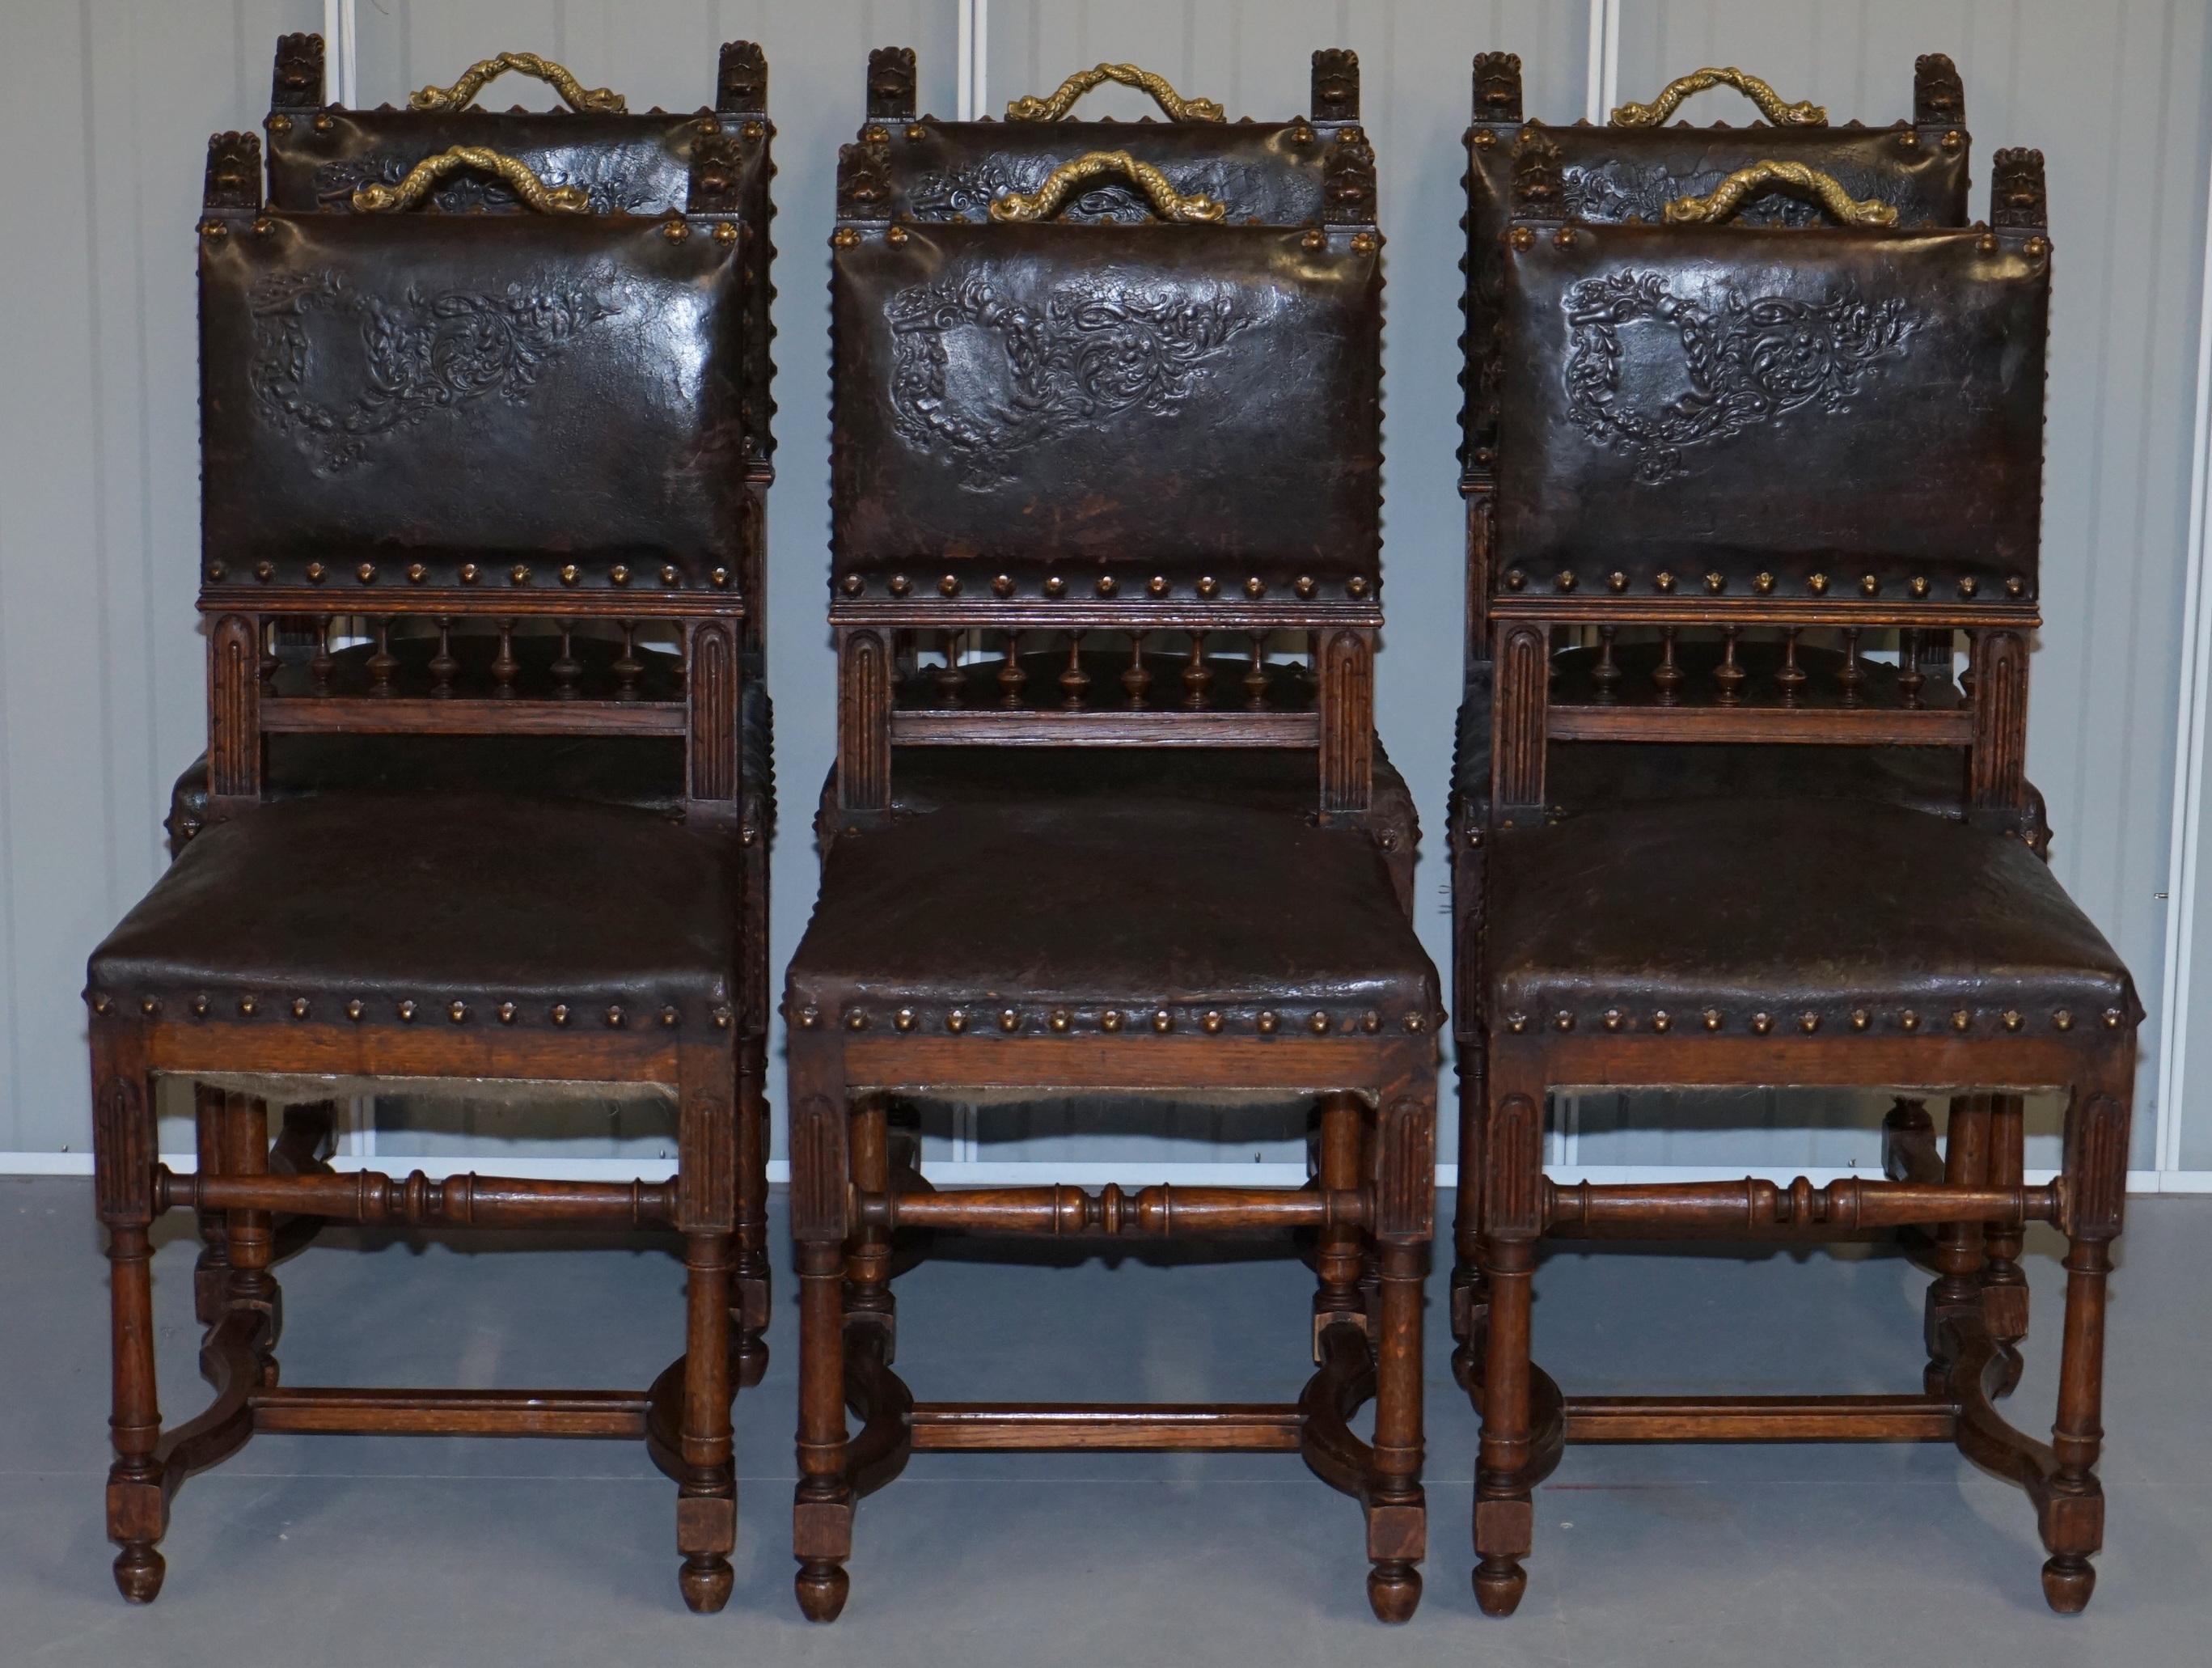 We are delighted to offer for sale this exceptional set of six French oak with Embossed pressed brown leather upholster Henry II circa 1880 dining chairs with bronze dolphin handles

A very rare and totally original set of Victorian dining chairs.